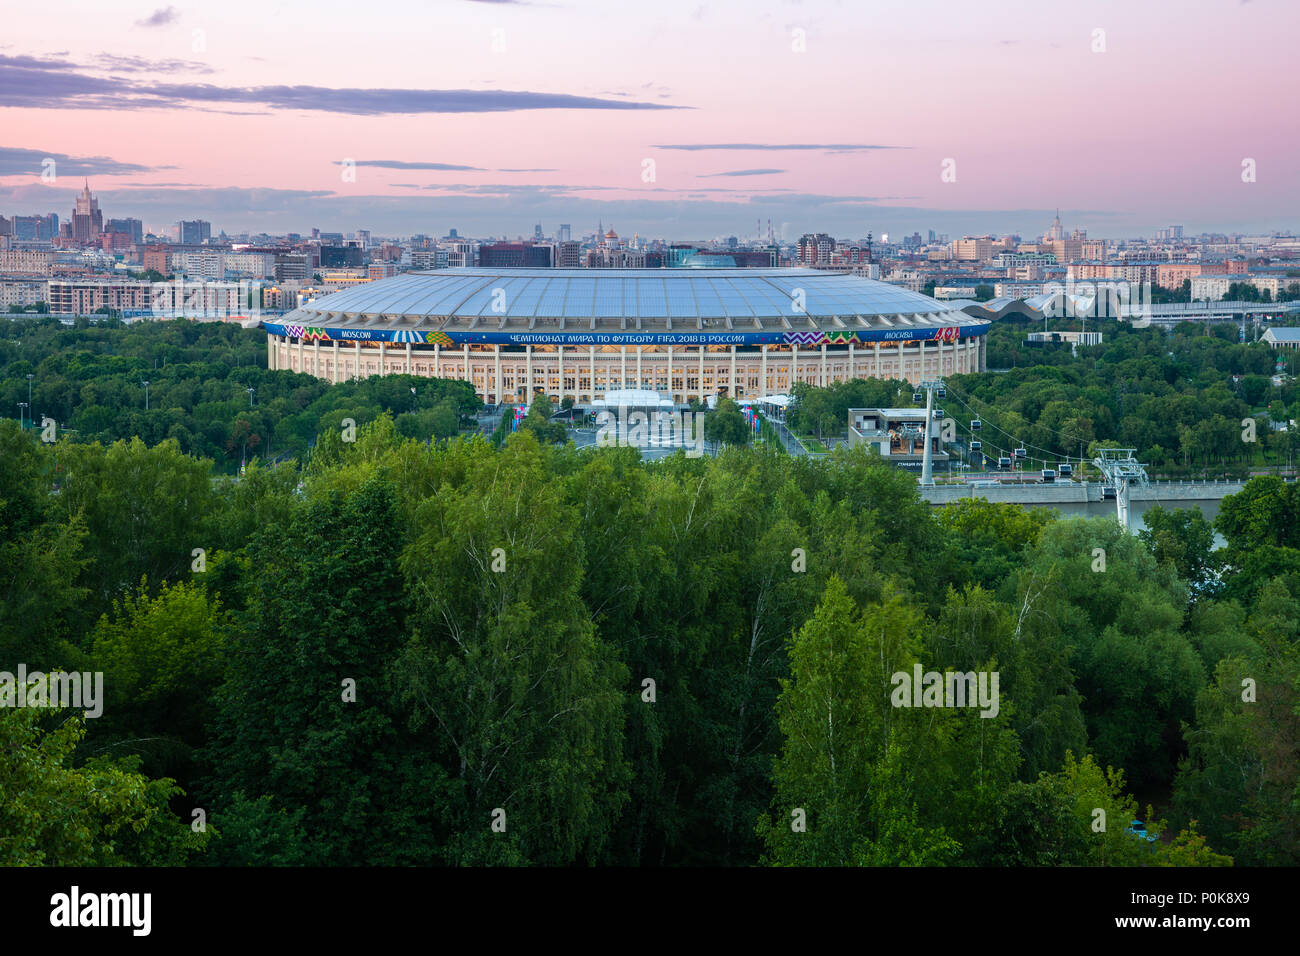 Moscow, Russia - June 06, 2018: The view of Luzhniki Stadium from Sparrow Hills observation deck, the main stadium of 2018 FIFA World Cup, June 06 201 Stock Photo